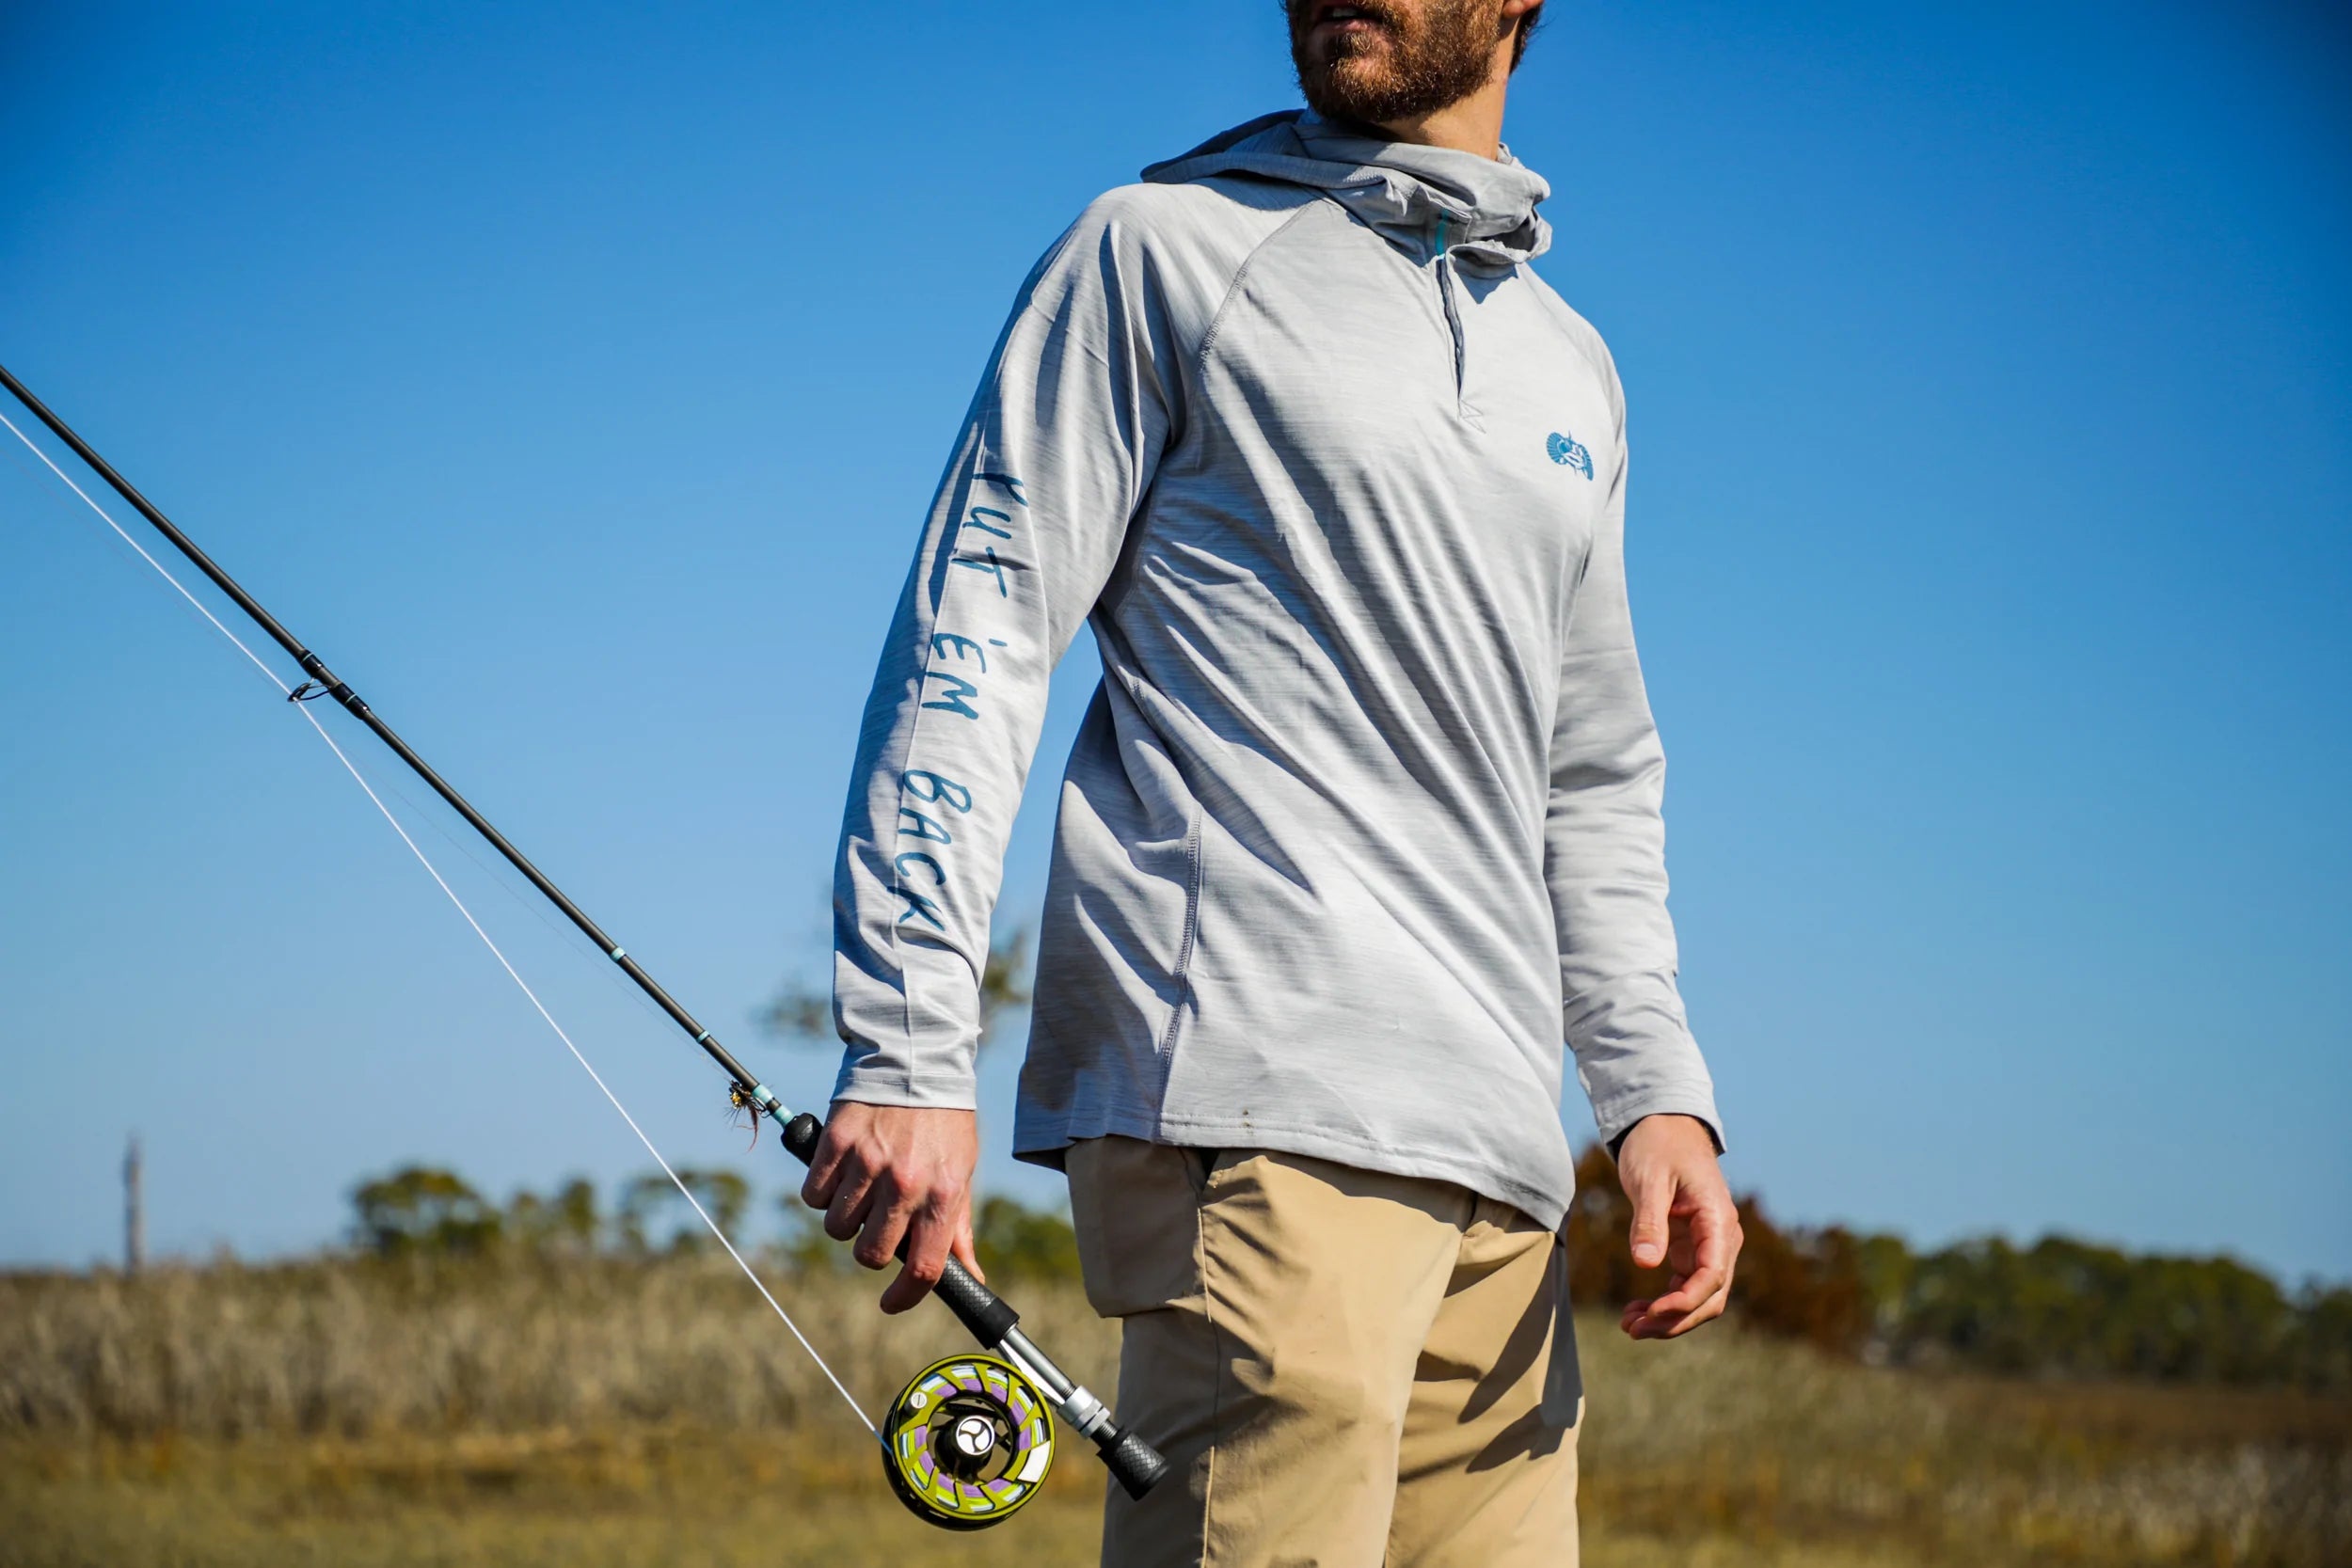 quick-drying materials, solar protection shirt, best short for inshore fishing